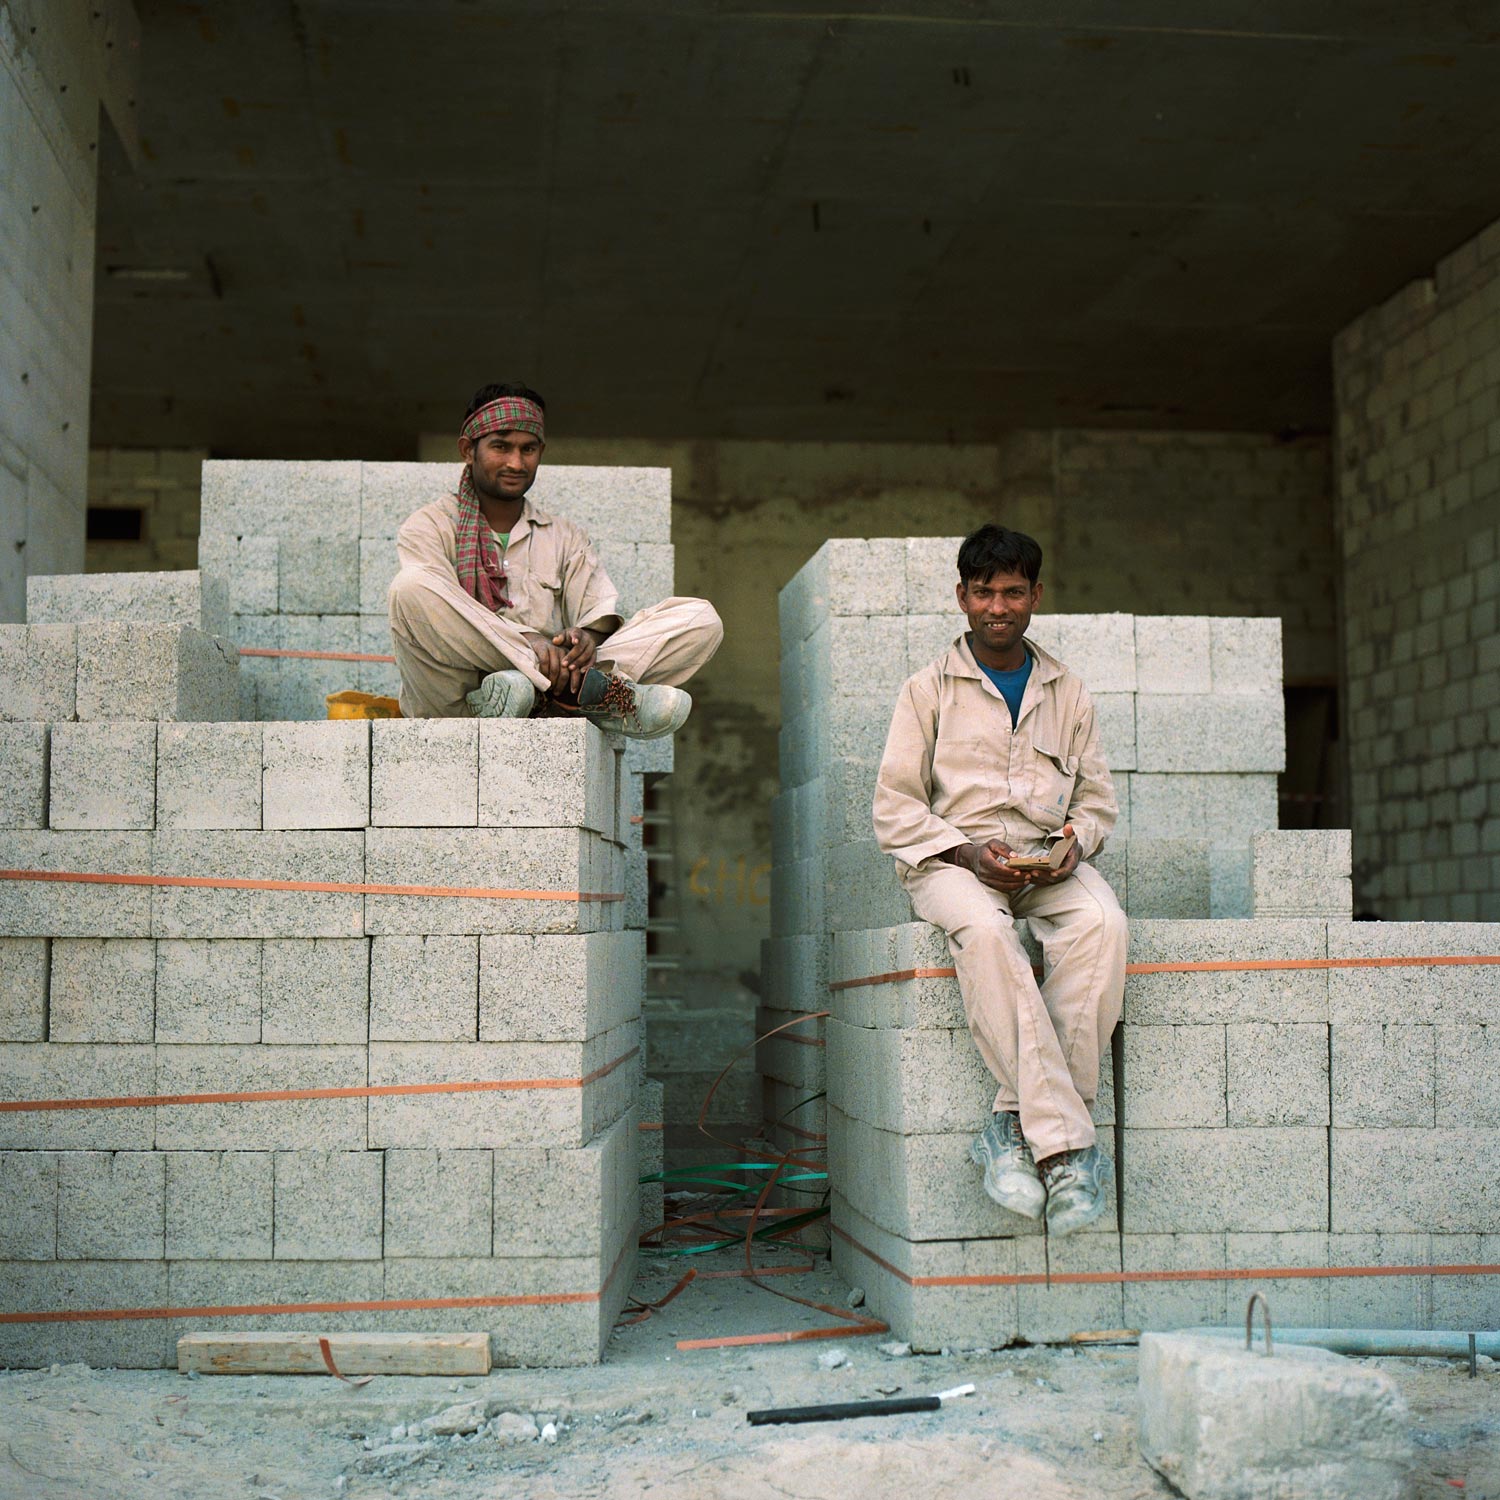 Two indian construction workers on a lunch break, sitting on a pile of concrete blocks in Dubai, Analogue photography.